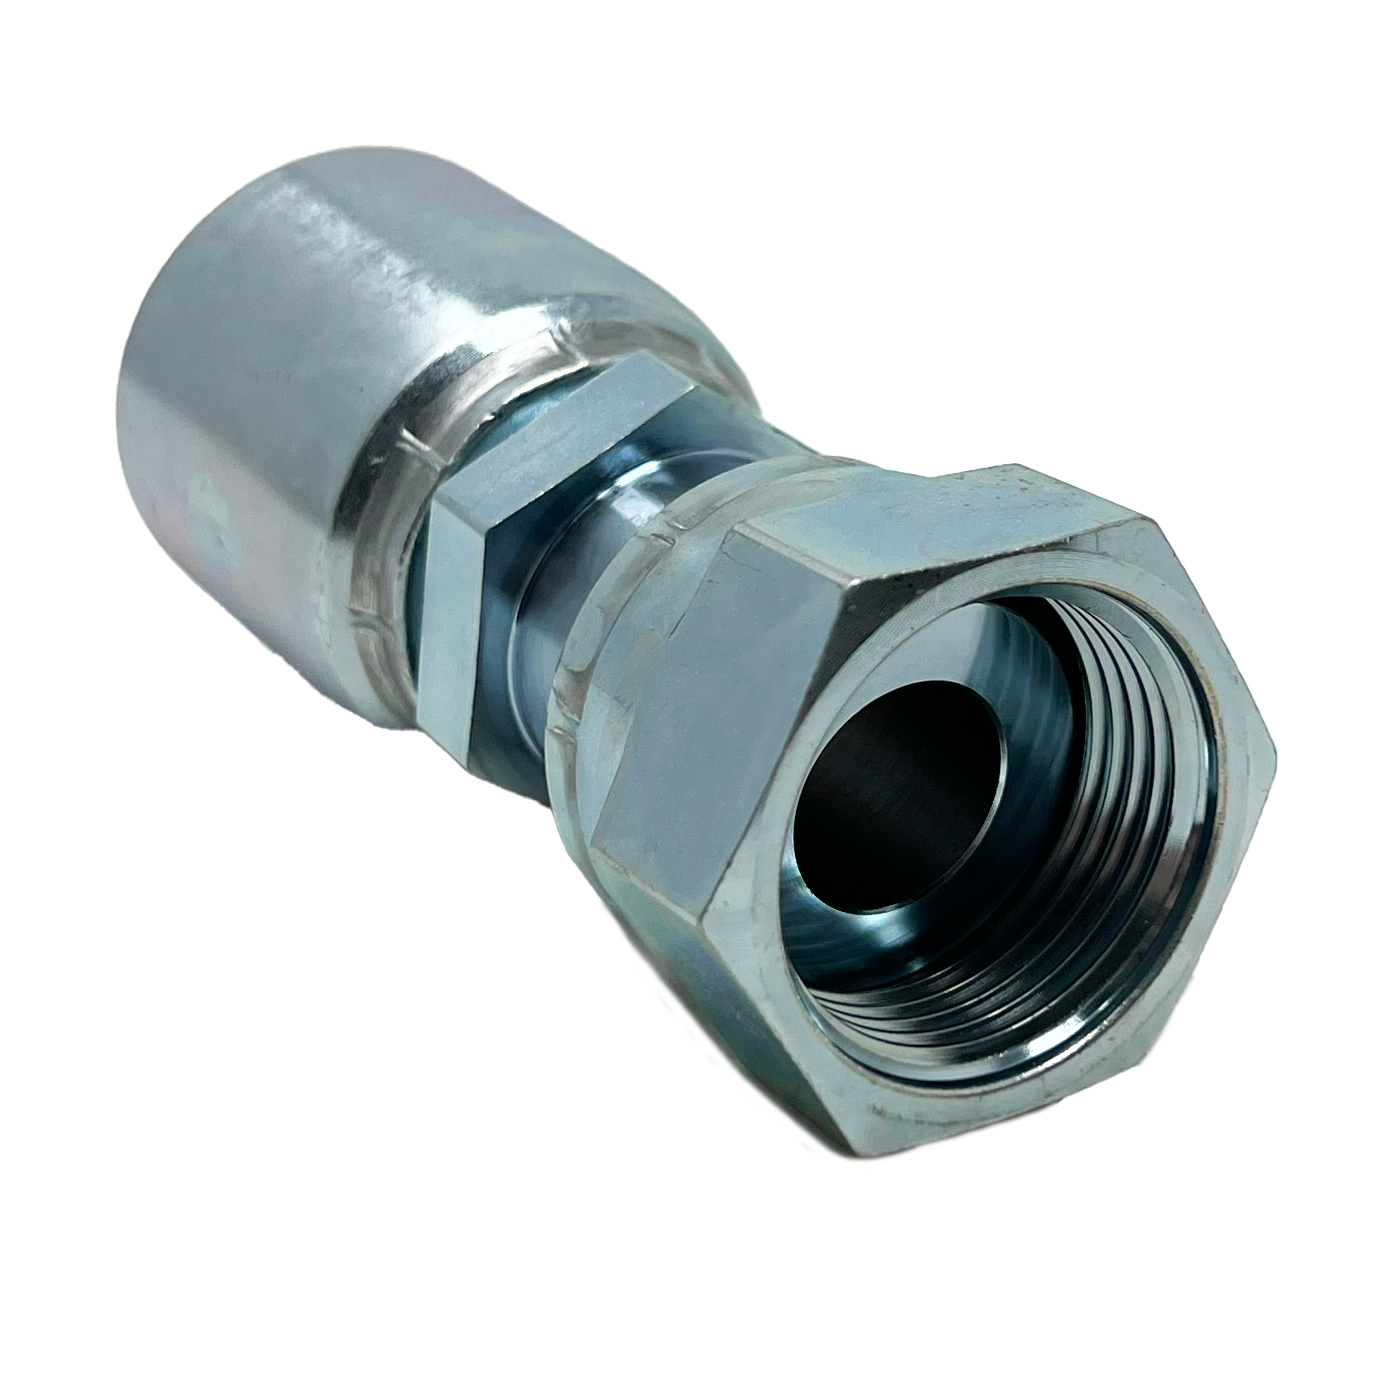 B2-OFFX-1212: Continental Hose Fitting, 0.75 (3/4") Hose ID x 1-3/16-12 Female ORFS, Straight Swivel Connection